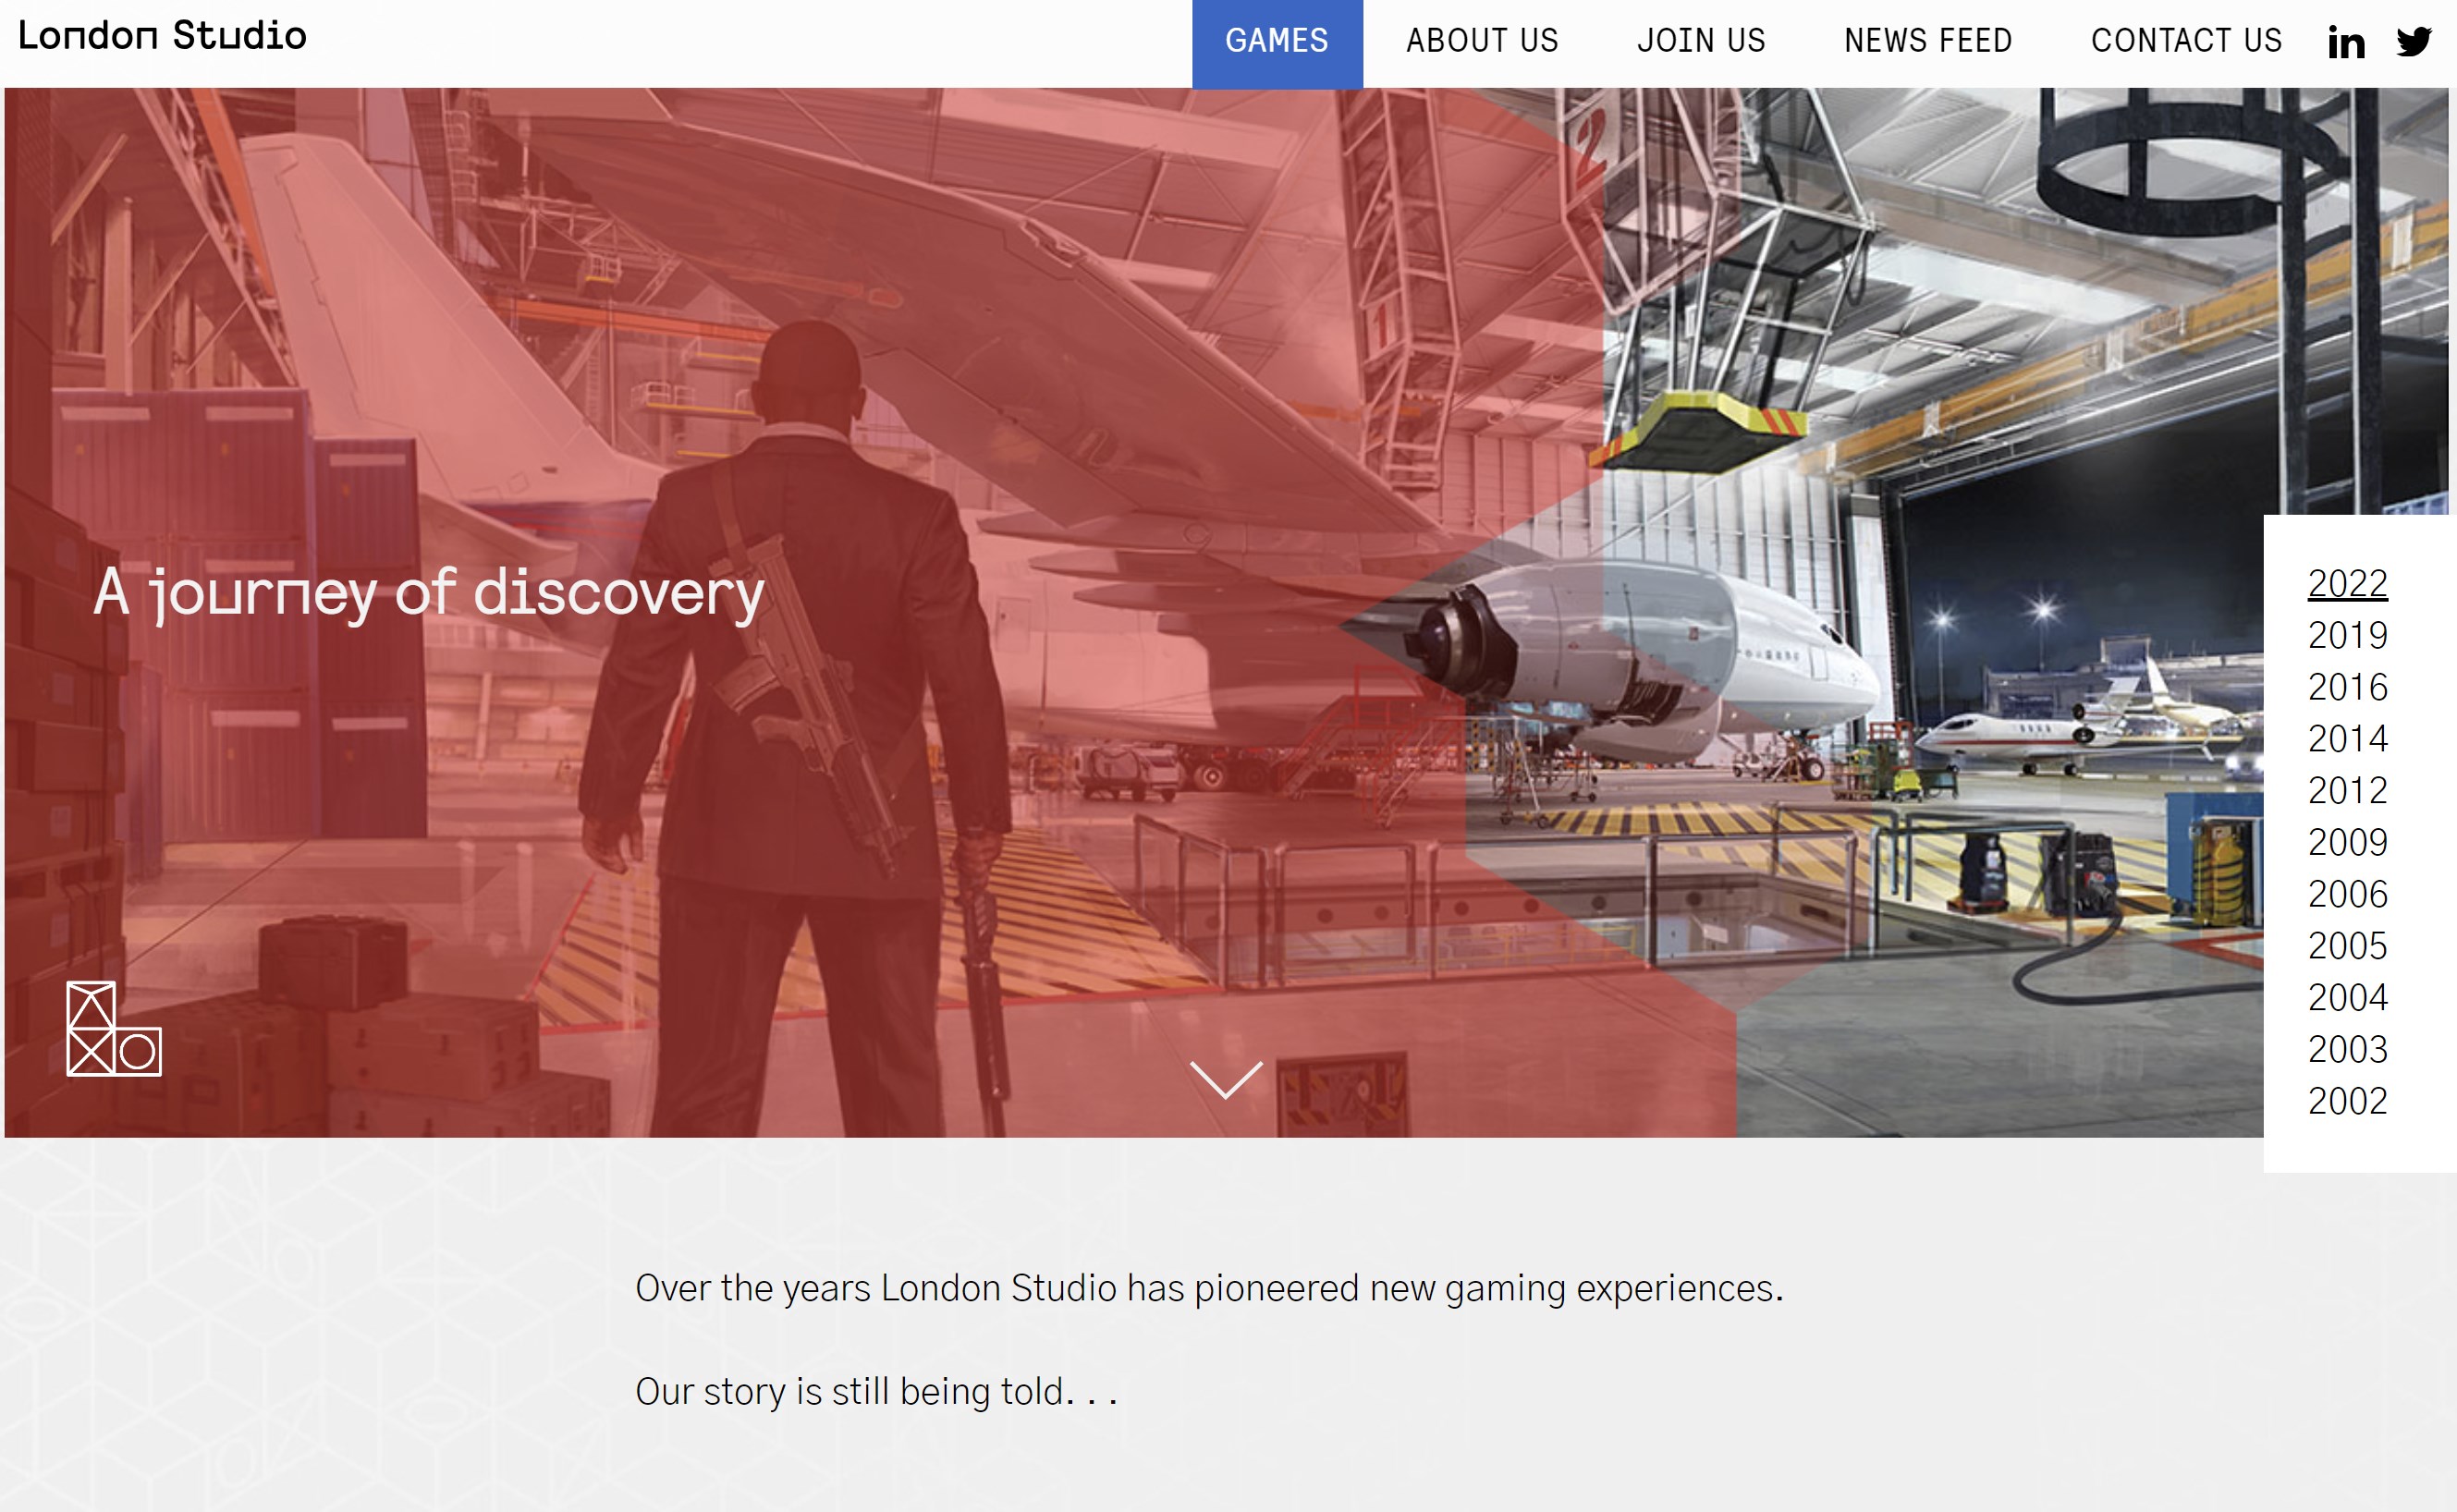 Screenshot of London Studio's games page, with a banner reading "A journey of discovery" and then body text reading "Over the years London Studio has pioneered new gaming experiences. Our story is still being told..."